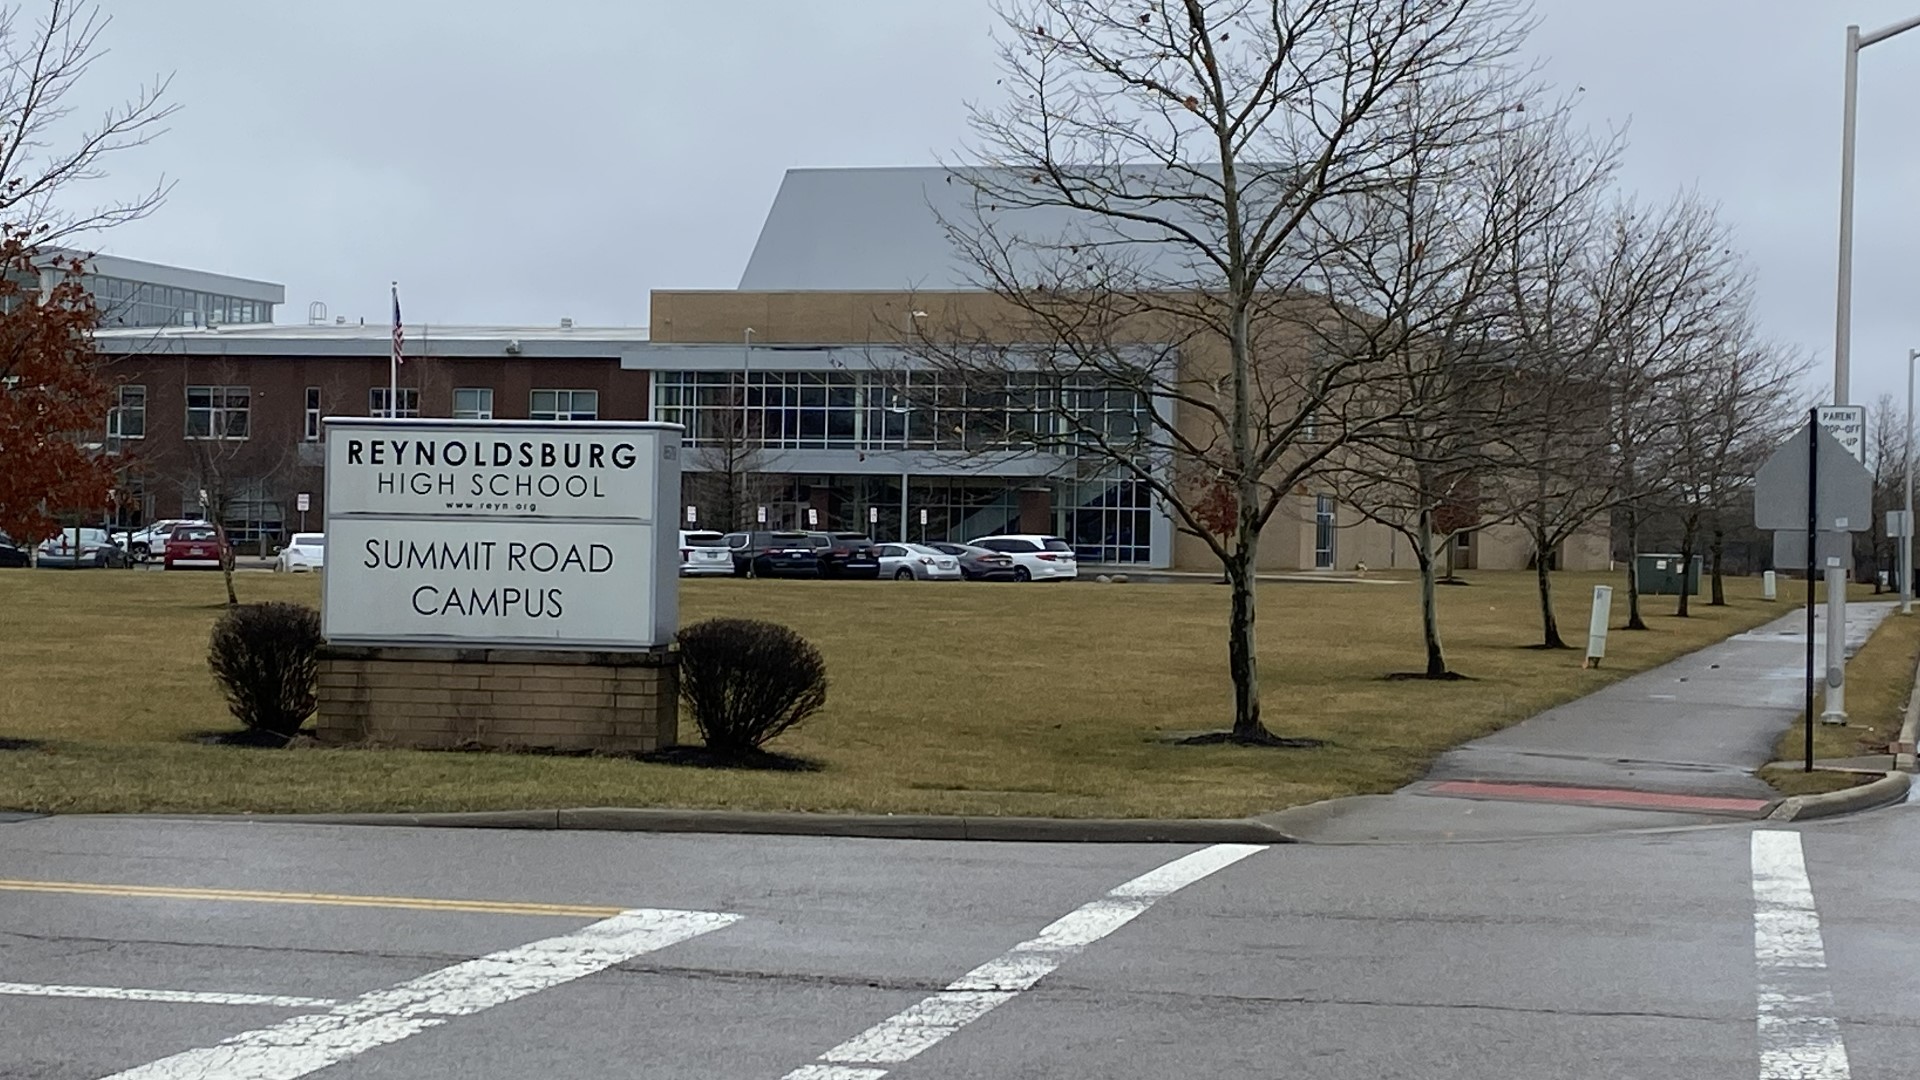 A student at Reynoldsburg High School Summit Road Campus was charged after he claimed to have had a weapon and induced panic at a basketball game on Thursday.